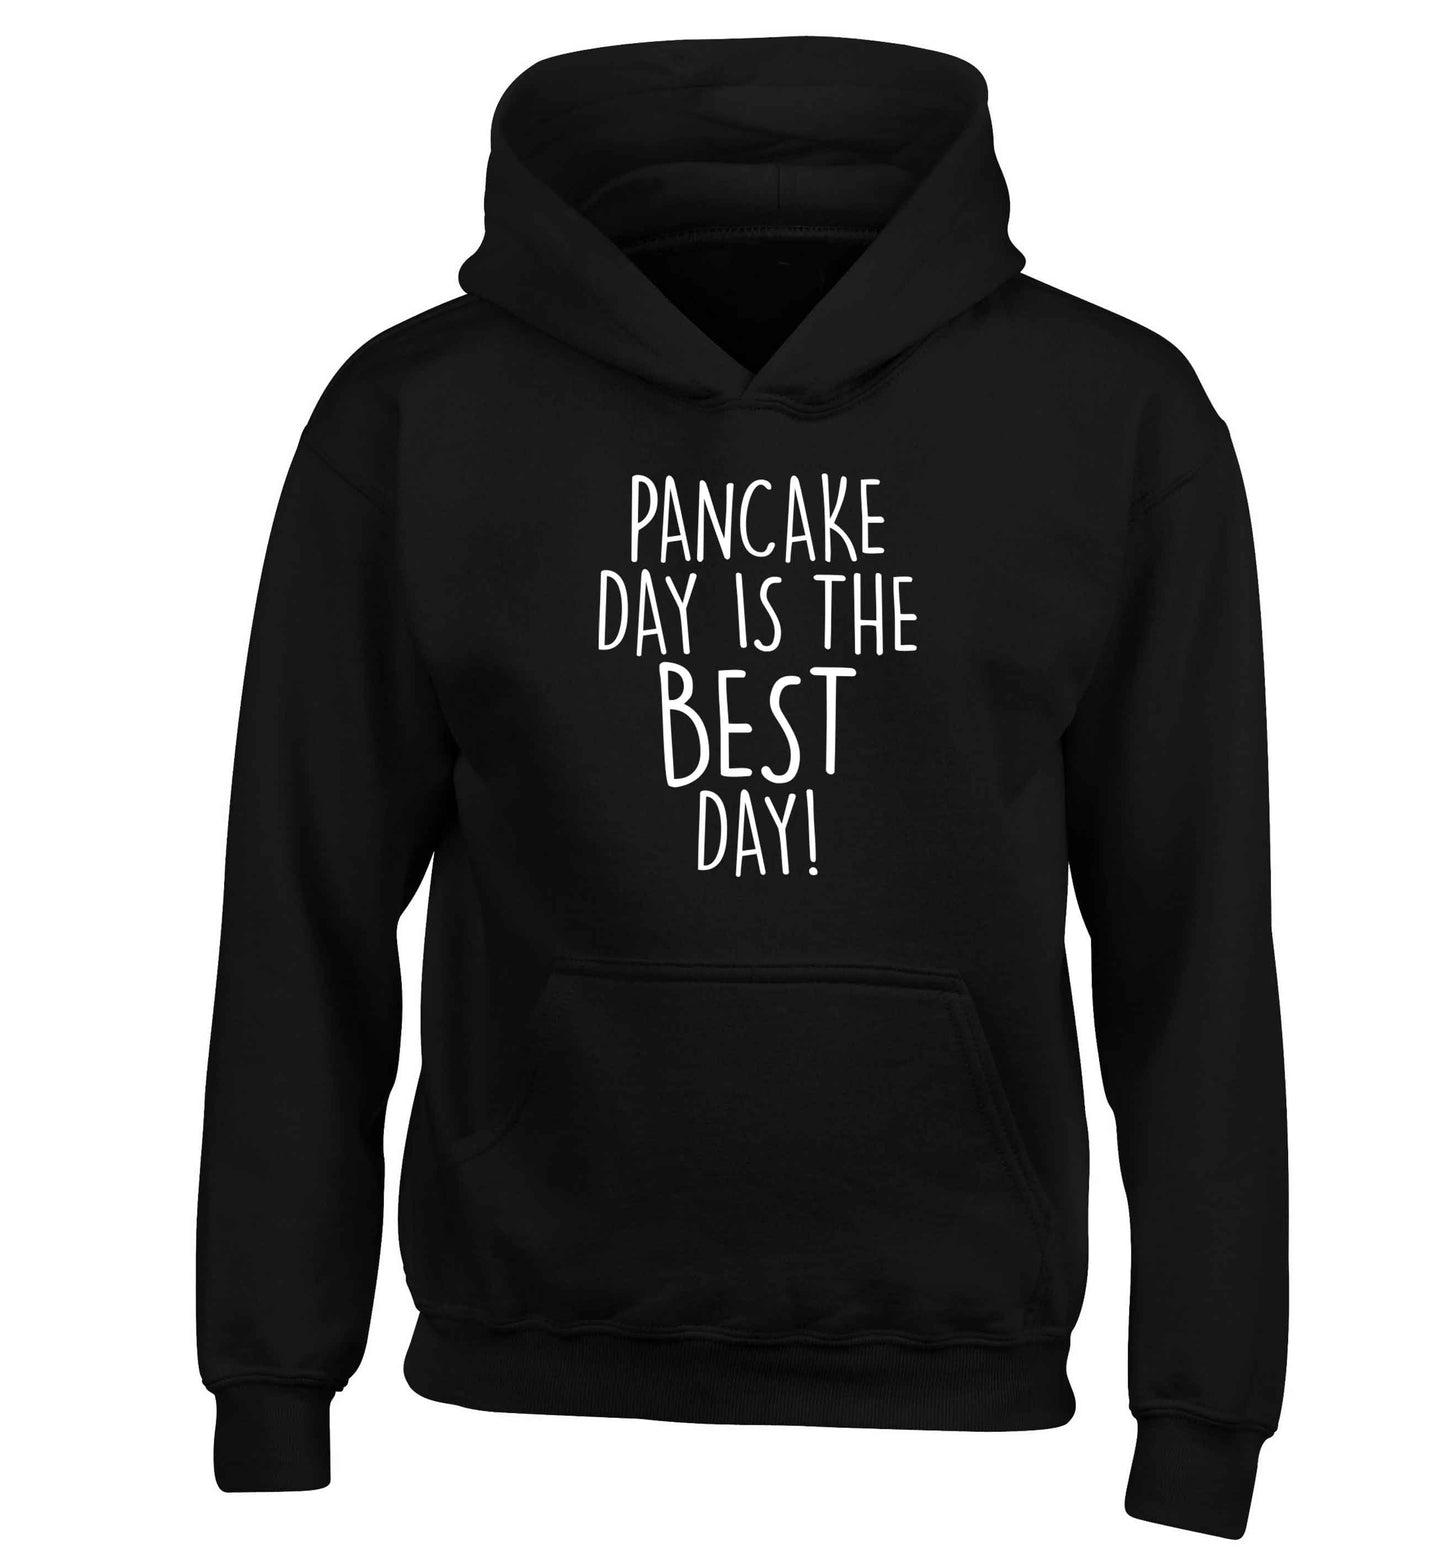 Pancake day is the best day children's black hoodie 12-13 Years